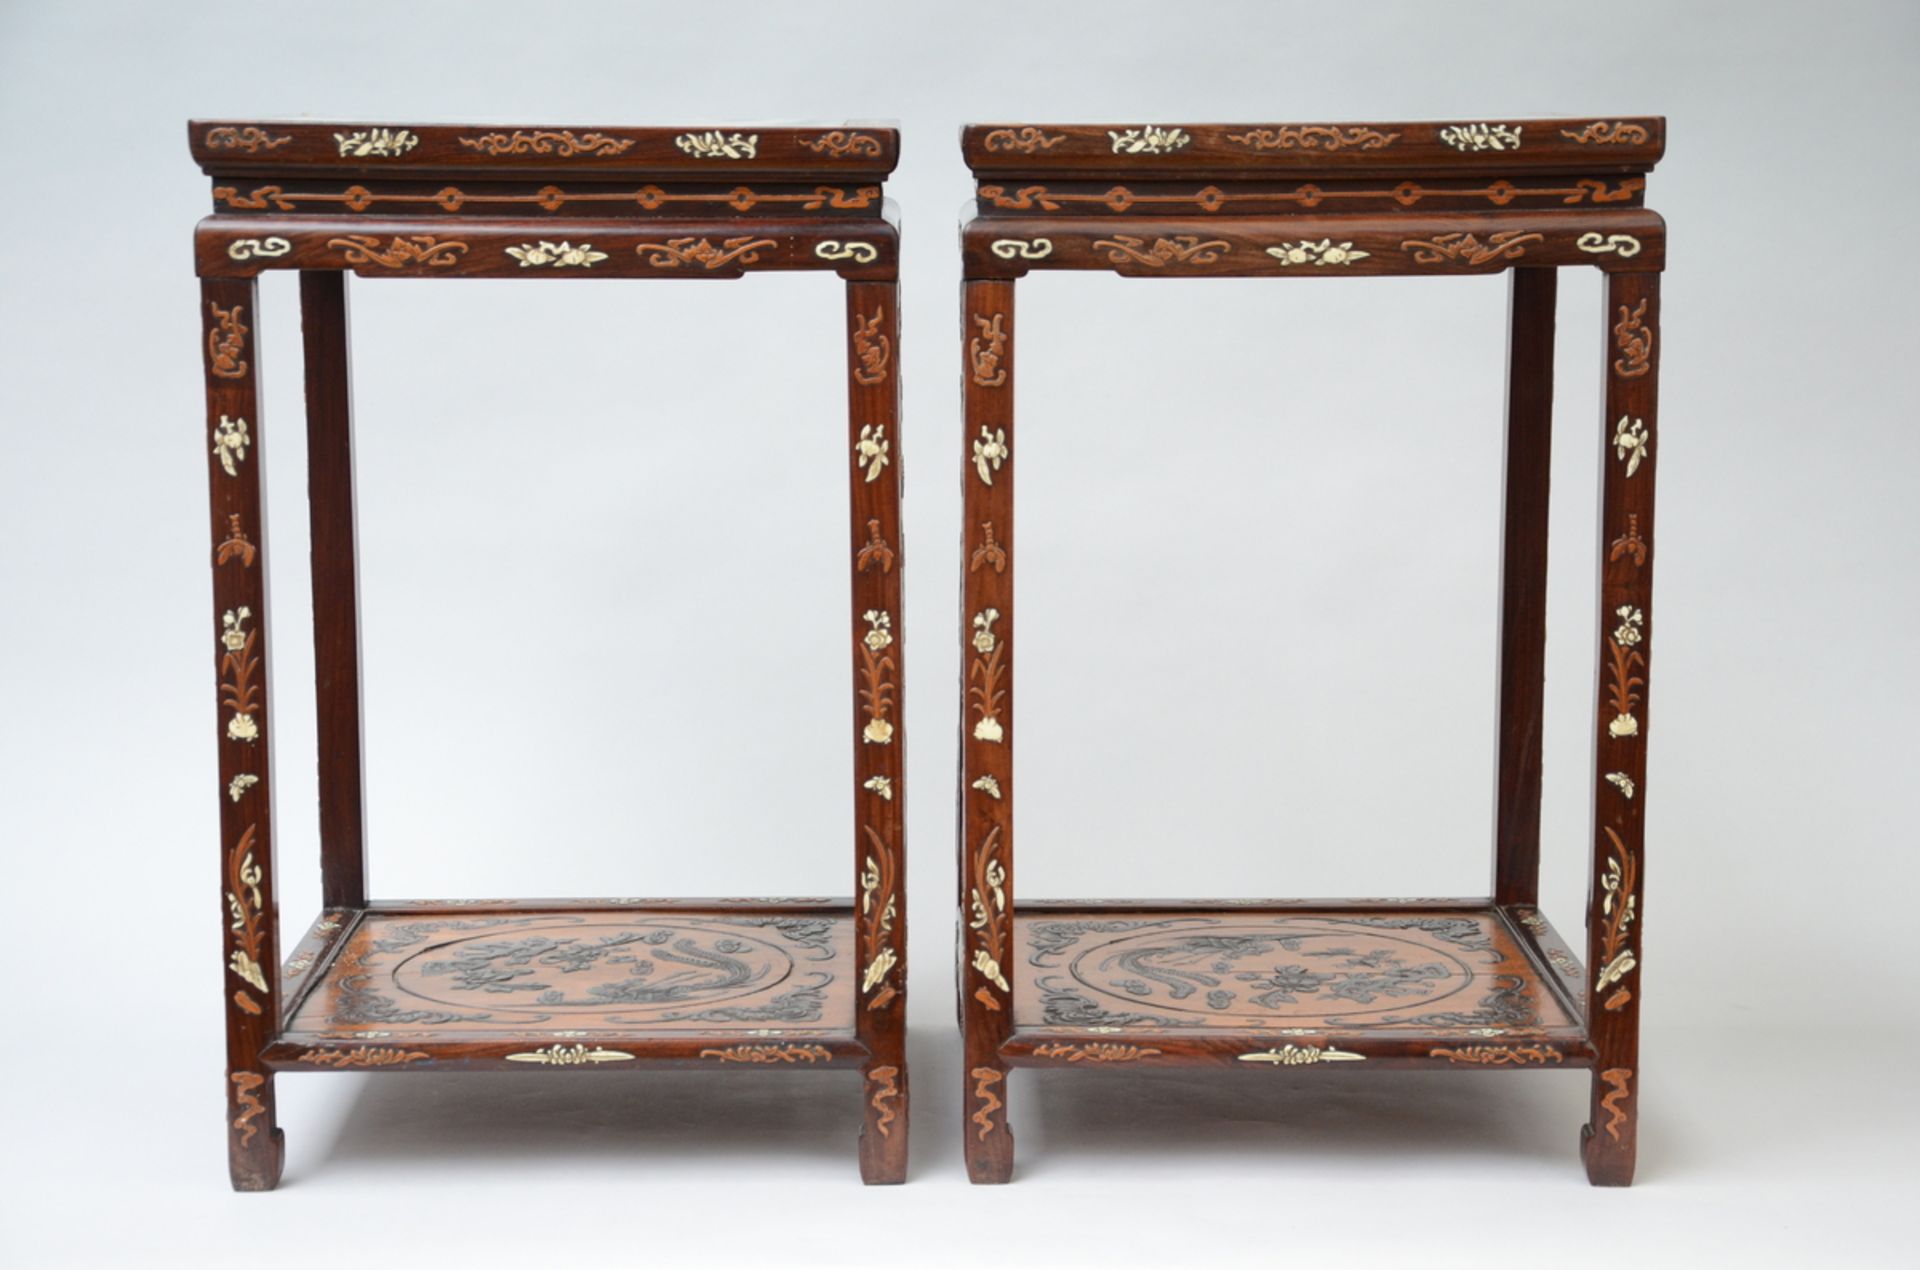 A pair of Chinese wooden stands with inlaywork, 19th century (70x46x46cm)